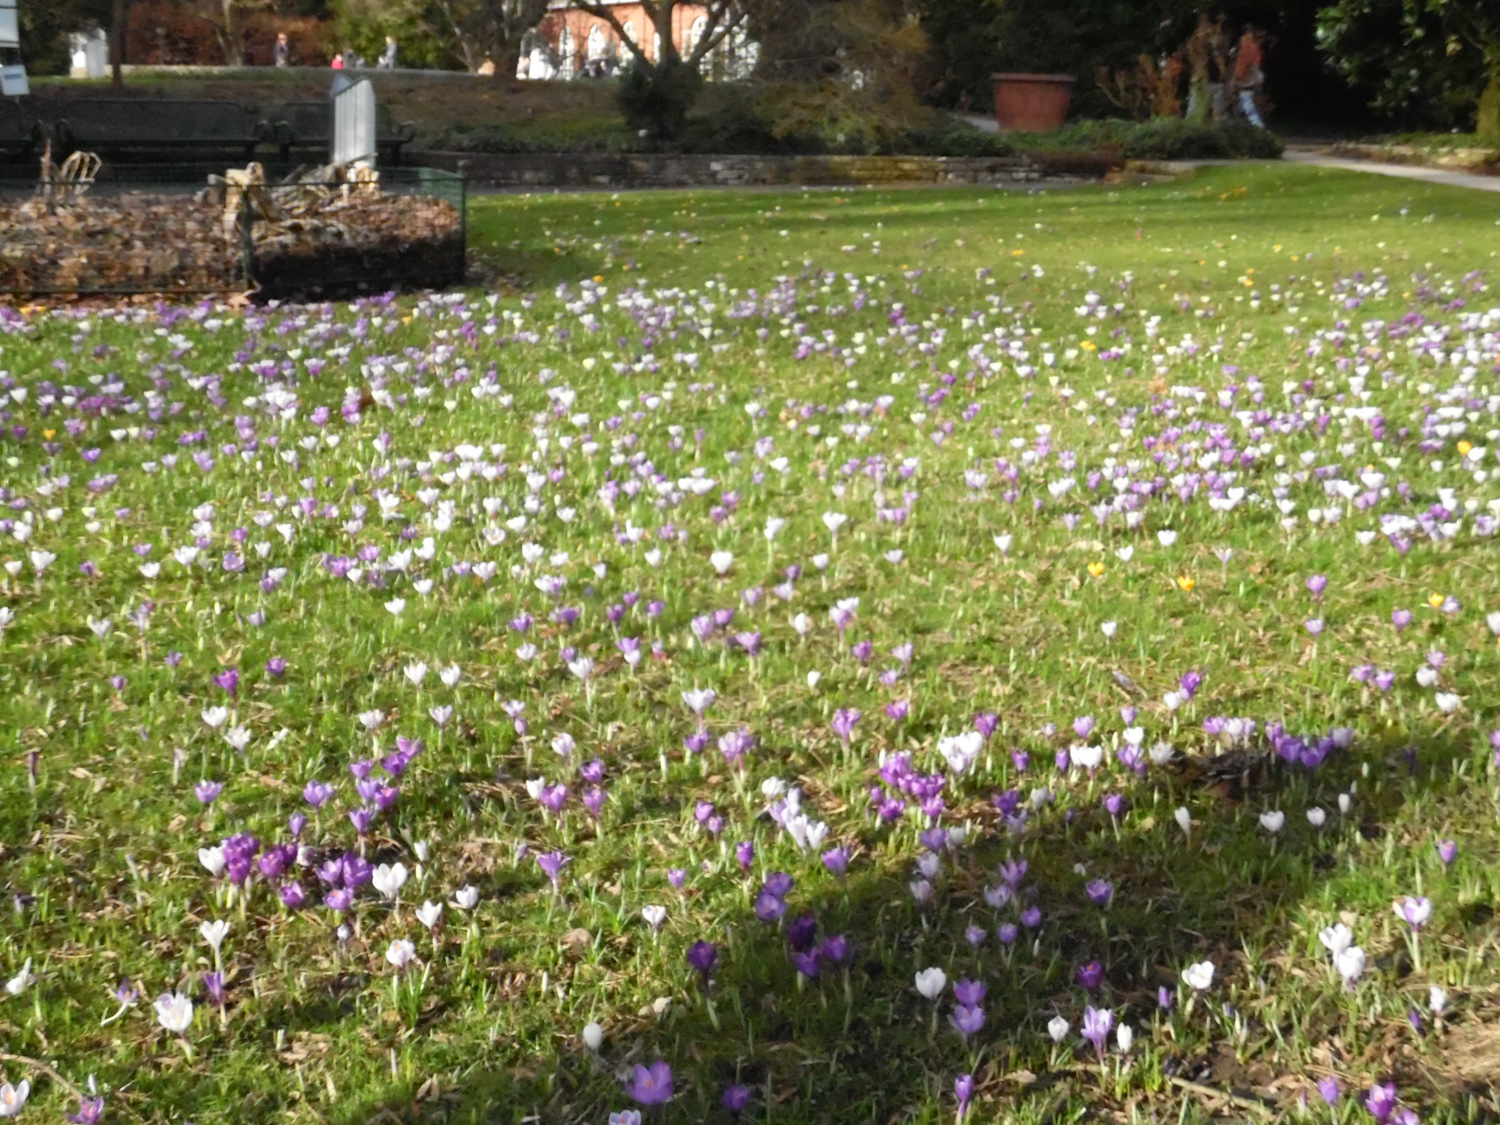 New tiny crocus blankets on the lawns